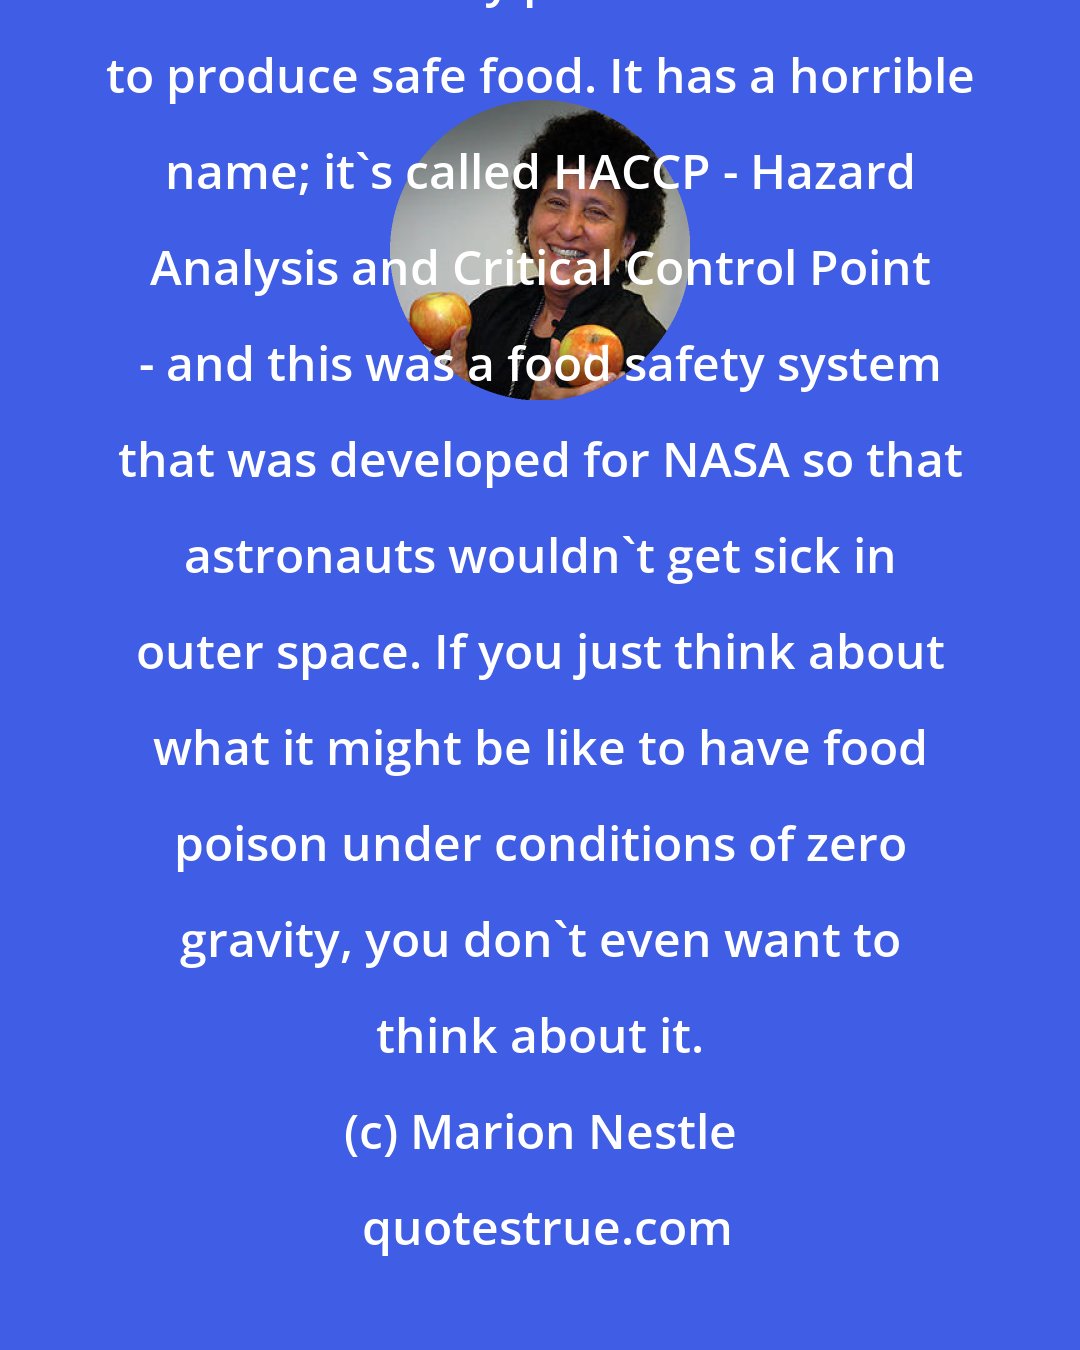 Marion Nestle: I would require every producer of food to follow and have enforced a standard safety plan. We know how to produce safe food. It has a horrible name; it's called HACCP - Hazard Analysis and Critical Control Point - and this was a food safety system that was developed for NASA so that astronauts wouldn't get sick in outer space. If you just think about what it might be like to have food poison under conditions of zero gravity, you don't even want to think about it.